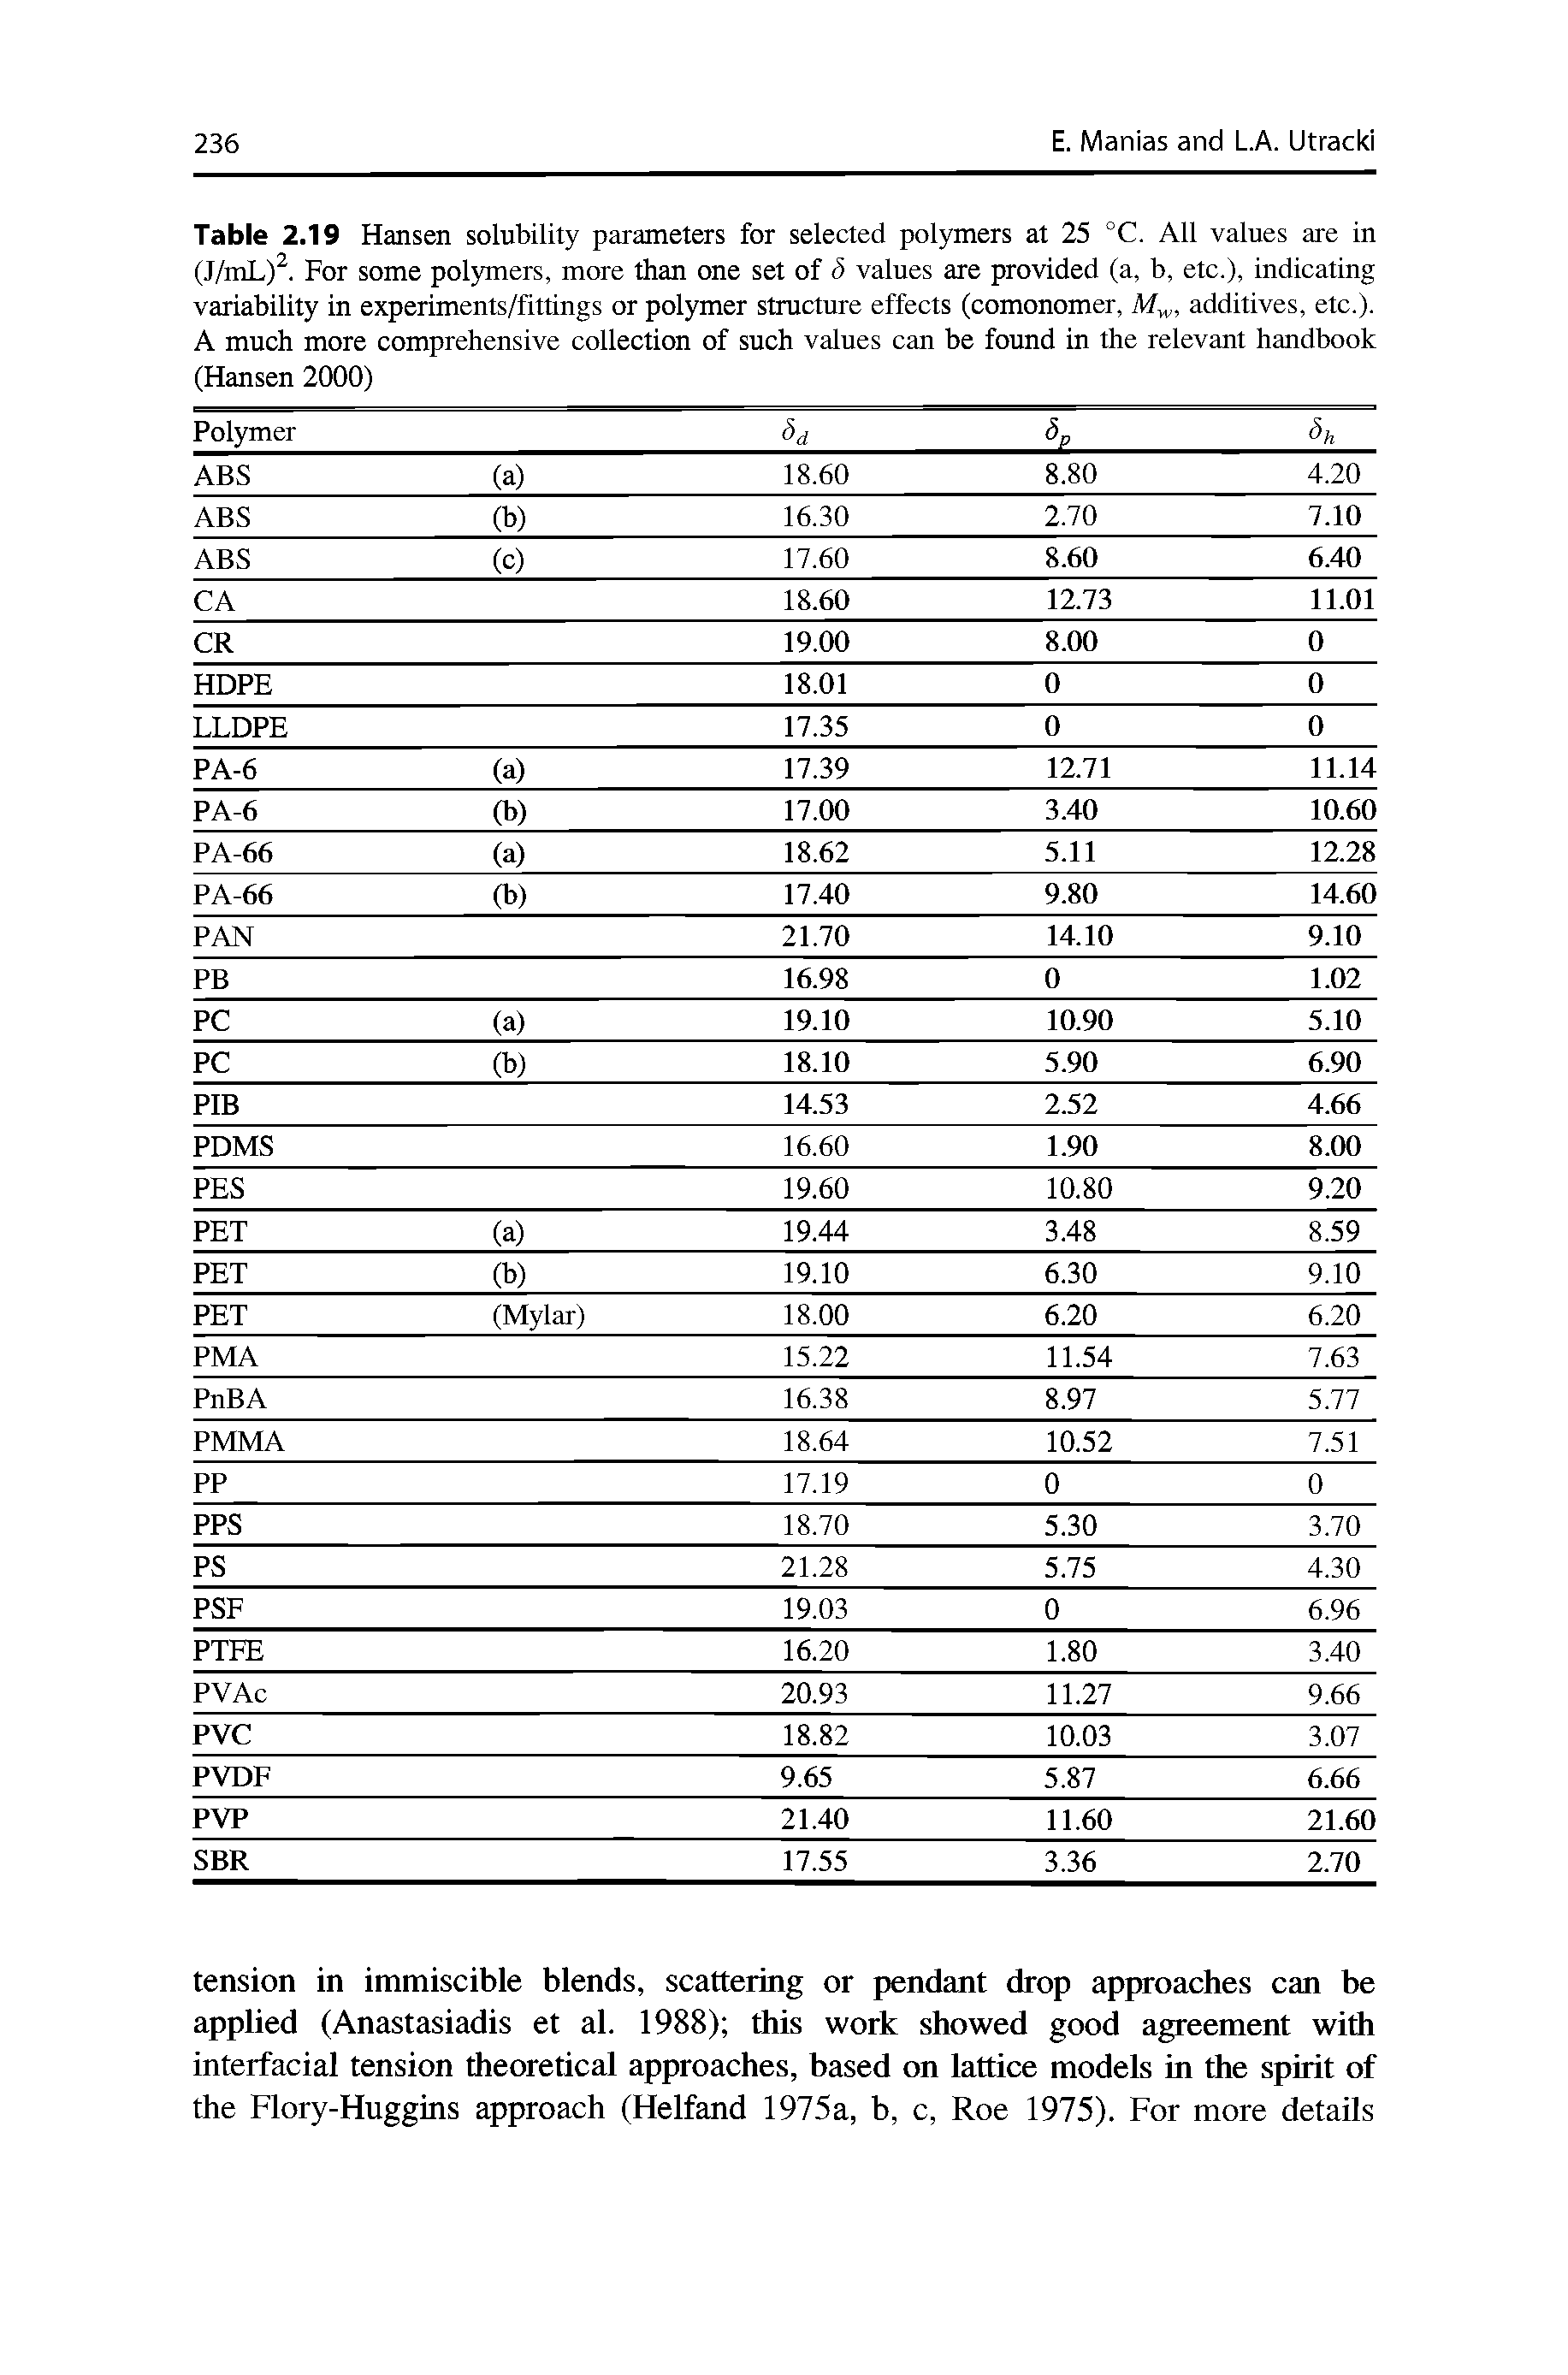 Table 2.19 Hansen solubility parameters for selected polymers at 25 °C. All values are in (J/mL). For some polymers, more than one set of 5 values are provided (a, b, etc.), indicating variability in experiments/fittings or polymer structure effects (comonomer, M-, additives, etc.). A much more comprehensive collection of such values can be found in the relevant handbook (Hansen 2000)...